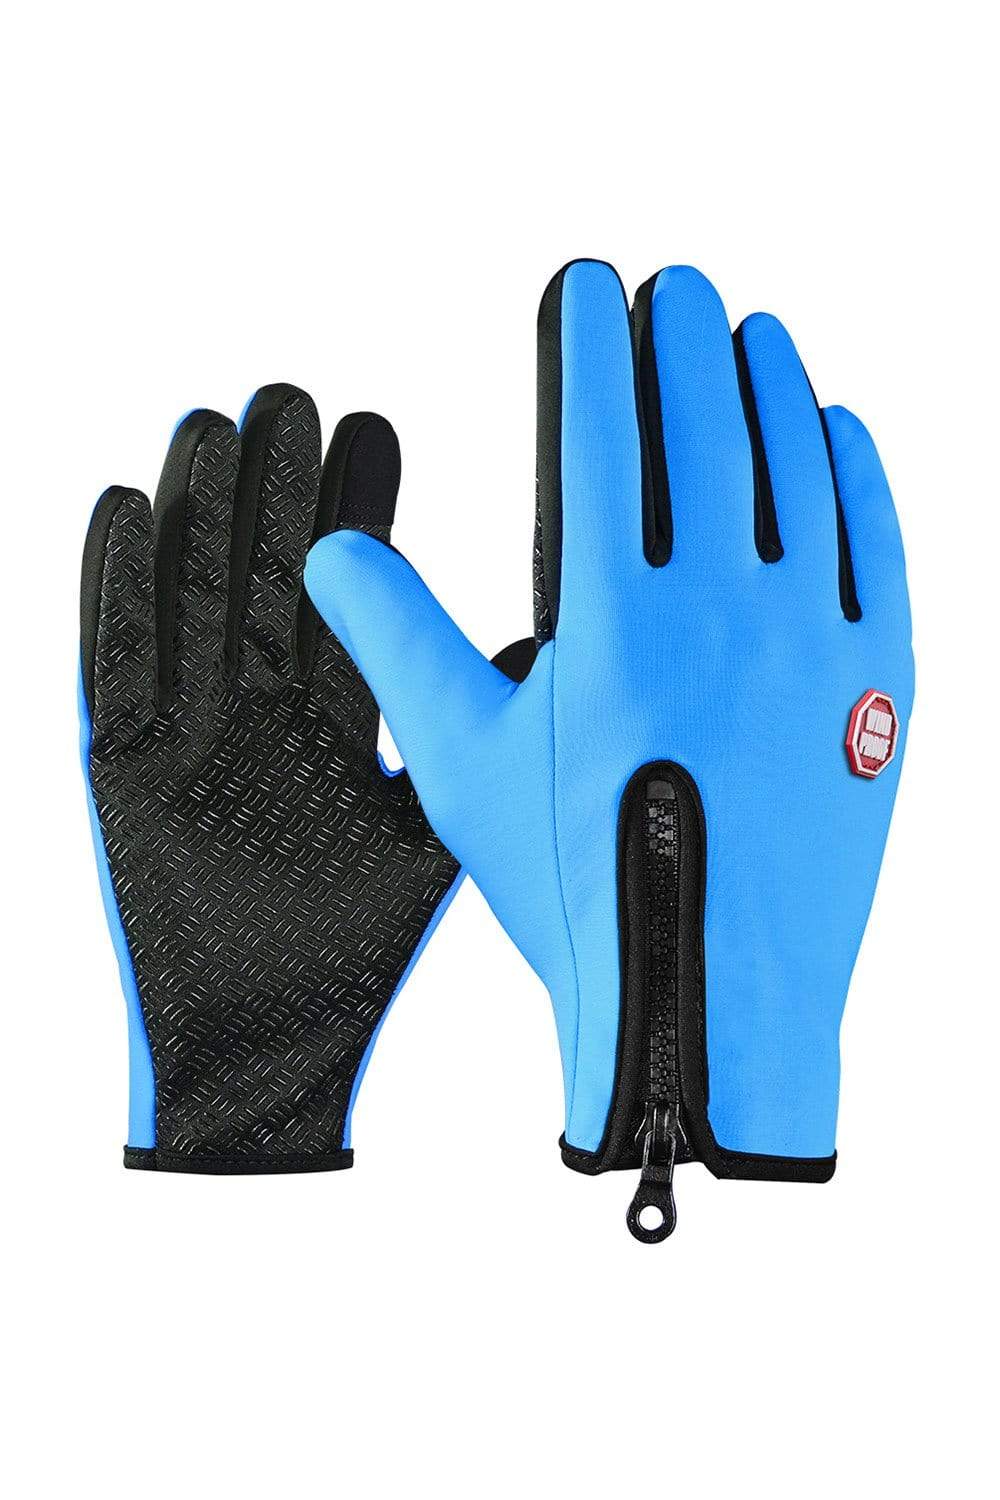 Warm Gloves Touch Screen Gloves Windproof Gloves for Hiking, Running, Cycling Gloves Blue / Medium MIER